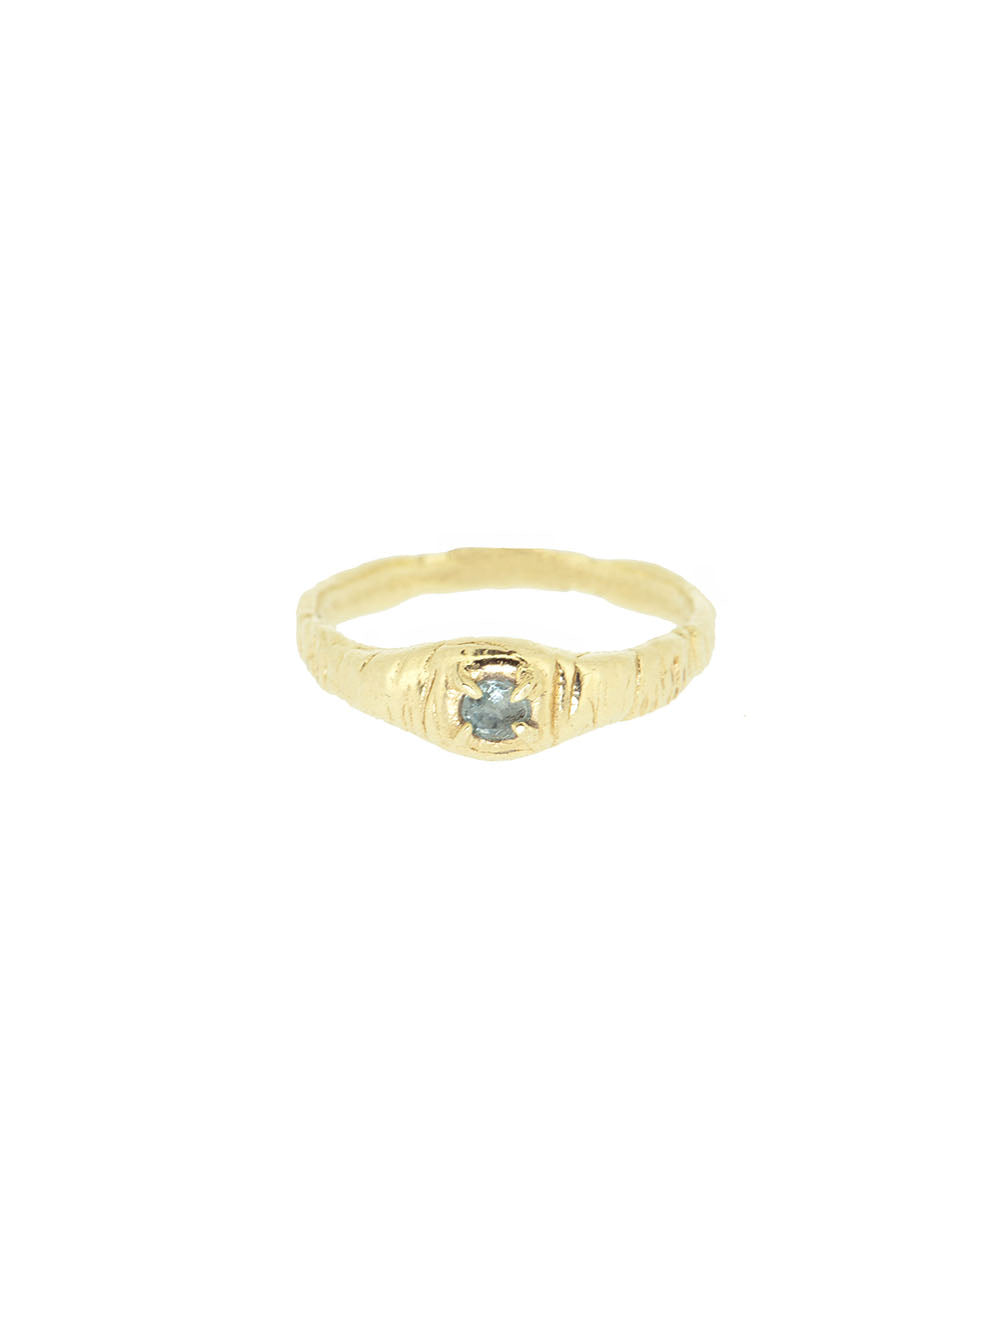 The smile - Topaz | 14K Gold Plated